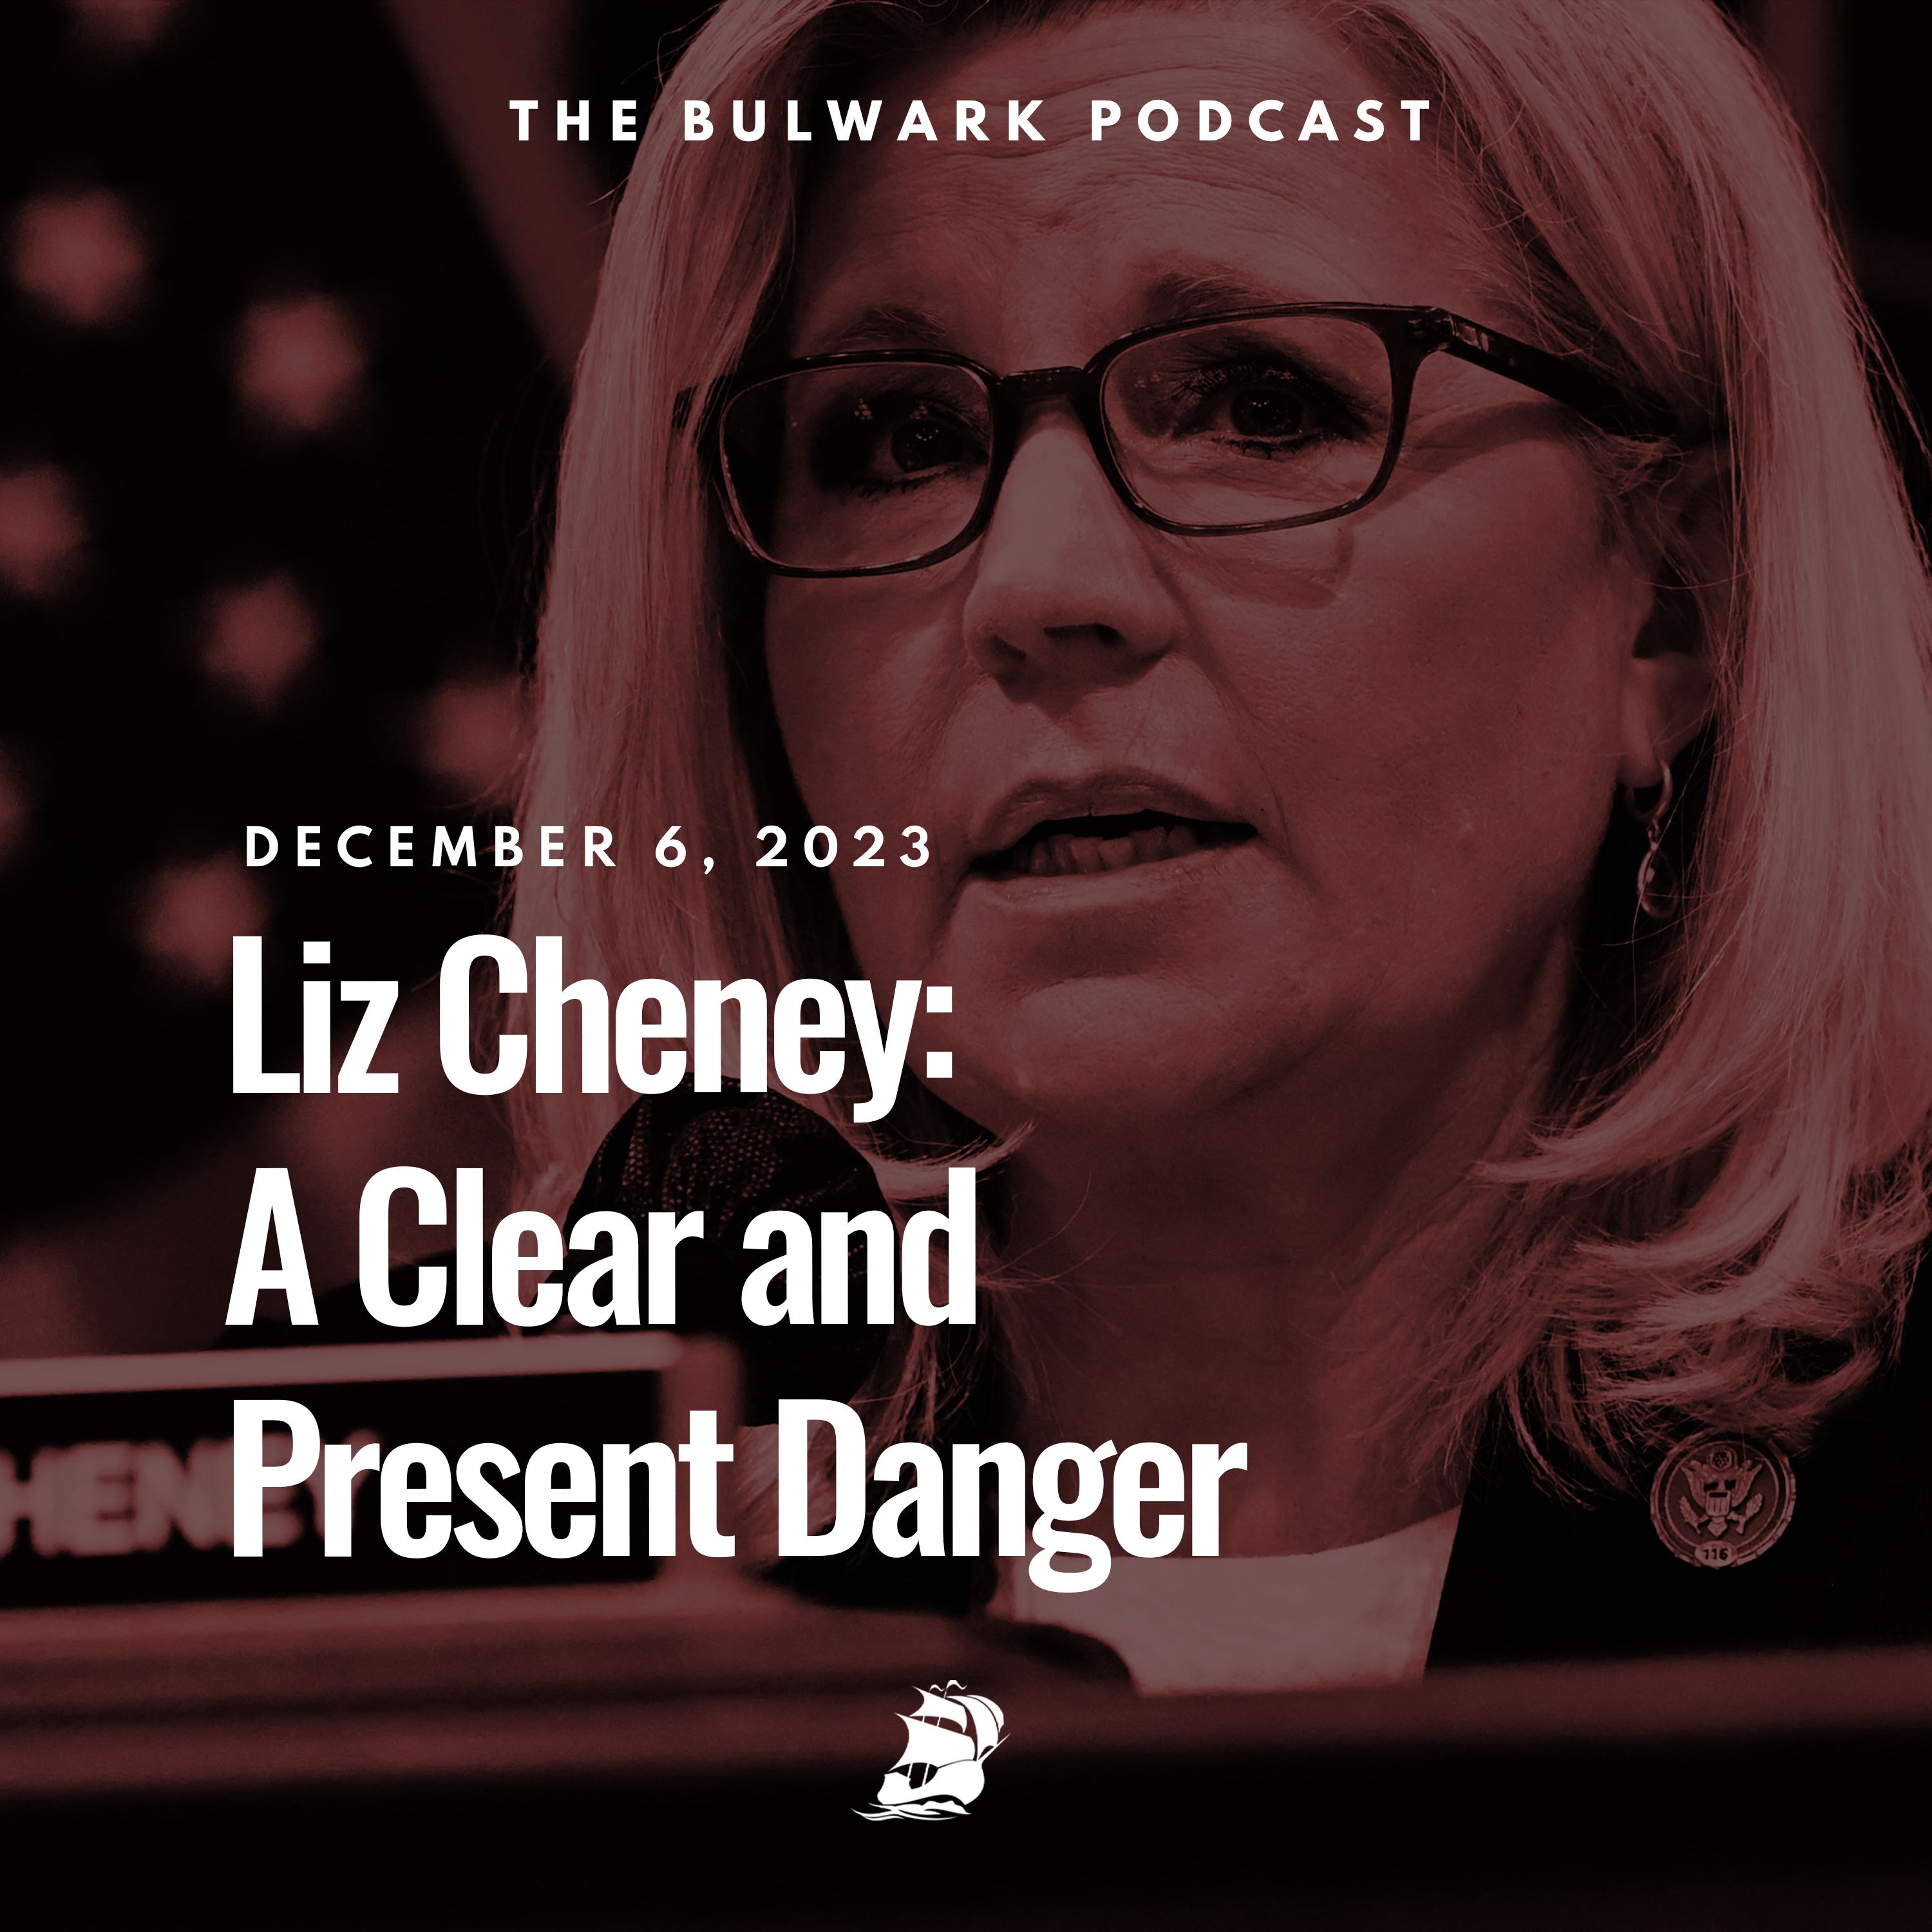 Liz Cheney: A Clear and Present Danger by The Bulwark Podcast